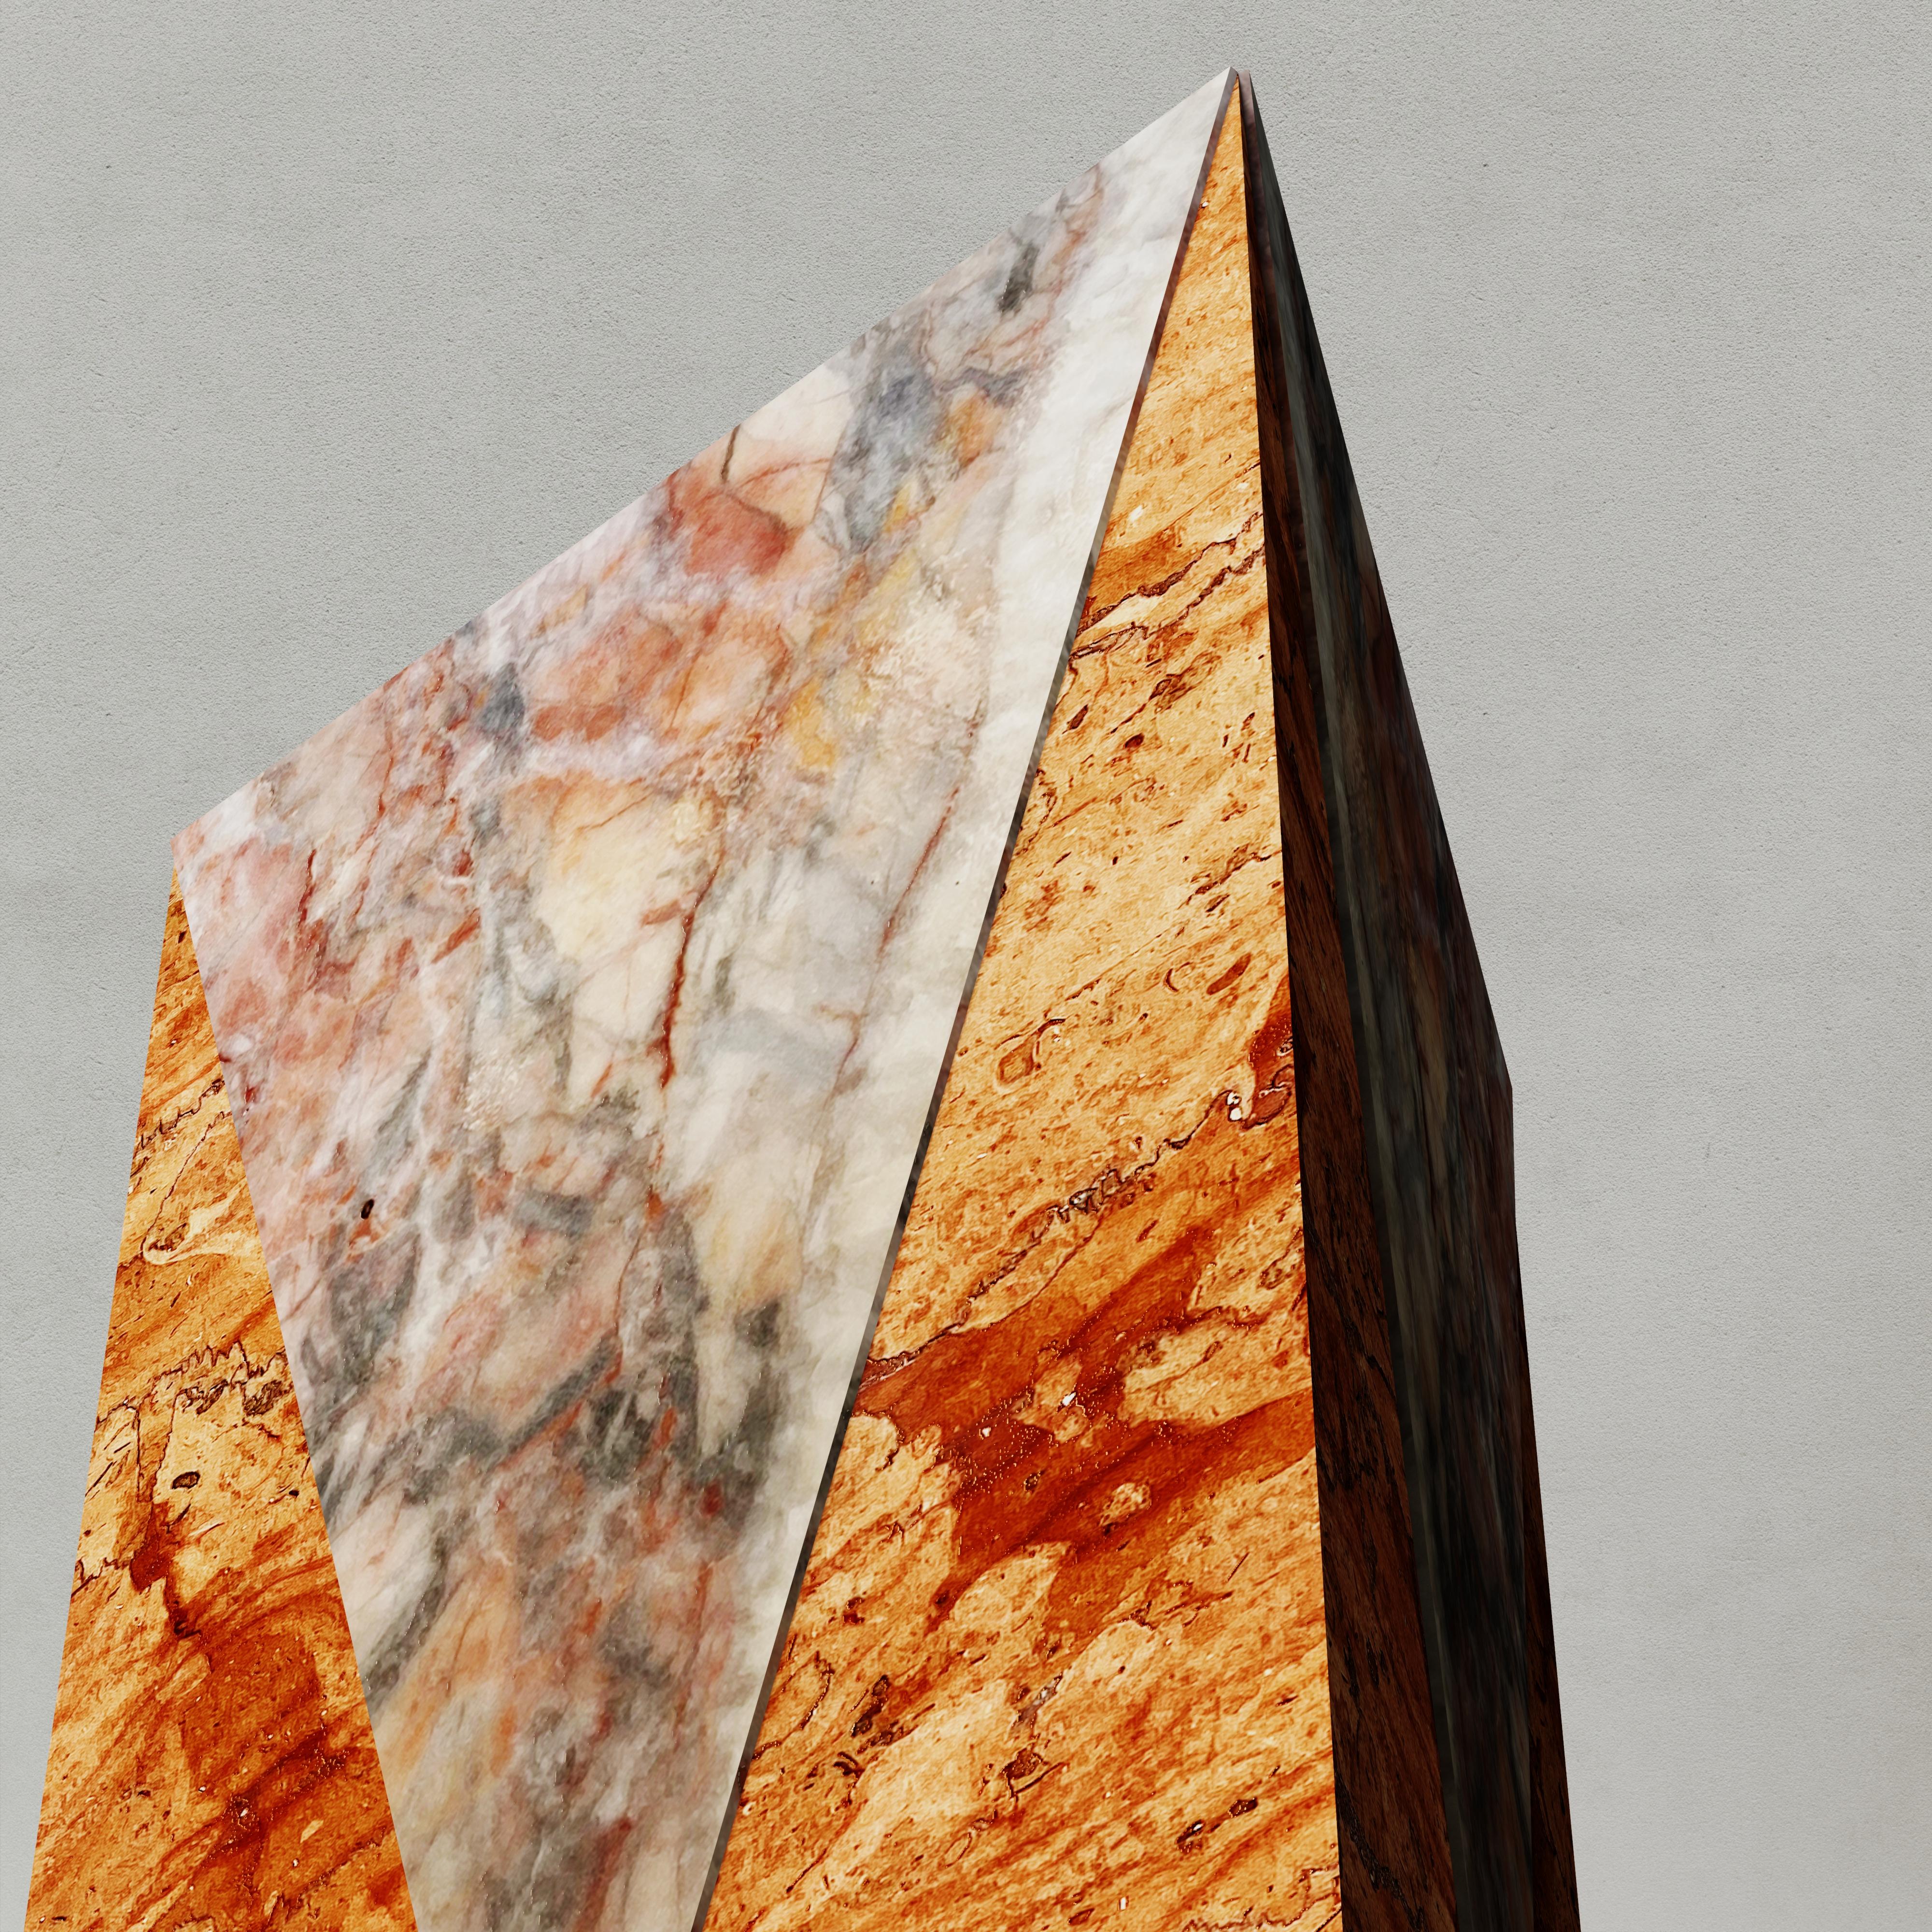 Polished Triangular vase in Asiago Red Marble and Fior di Pesco Carnico For Sale